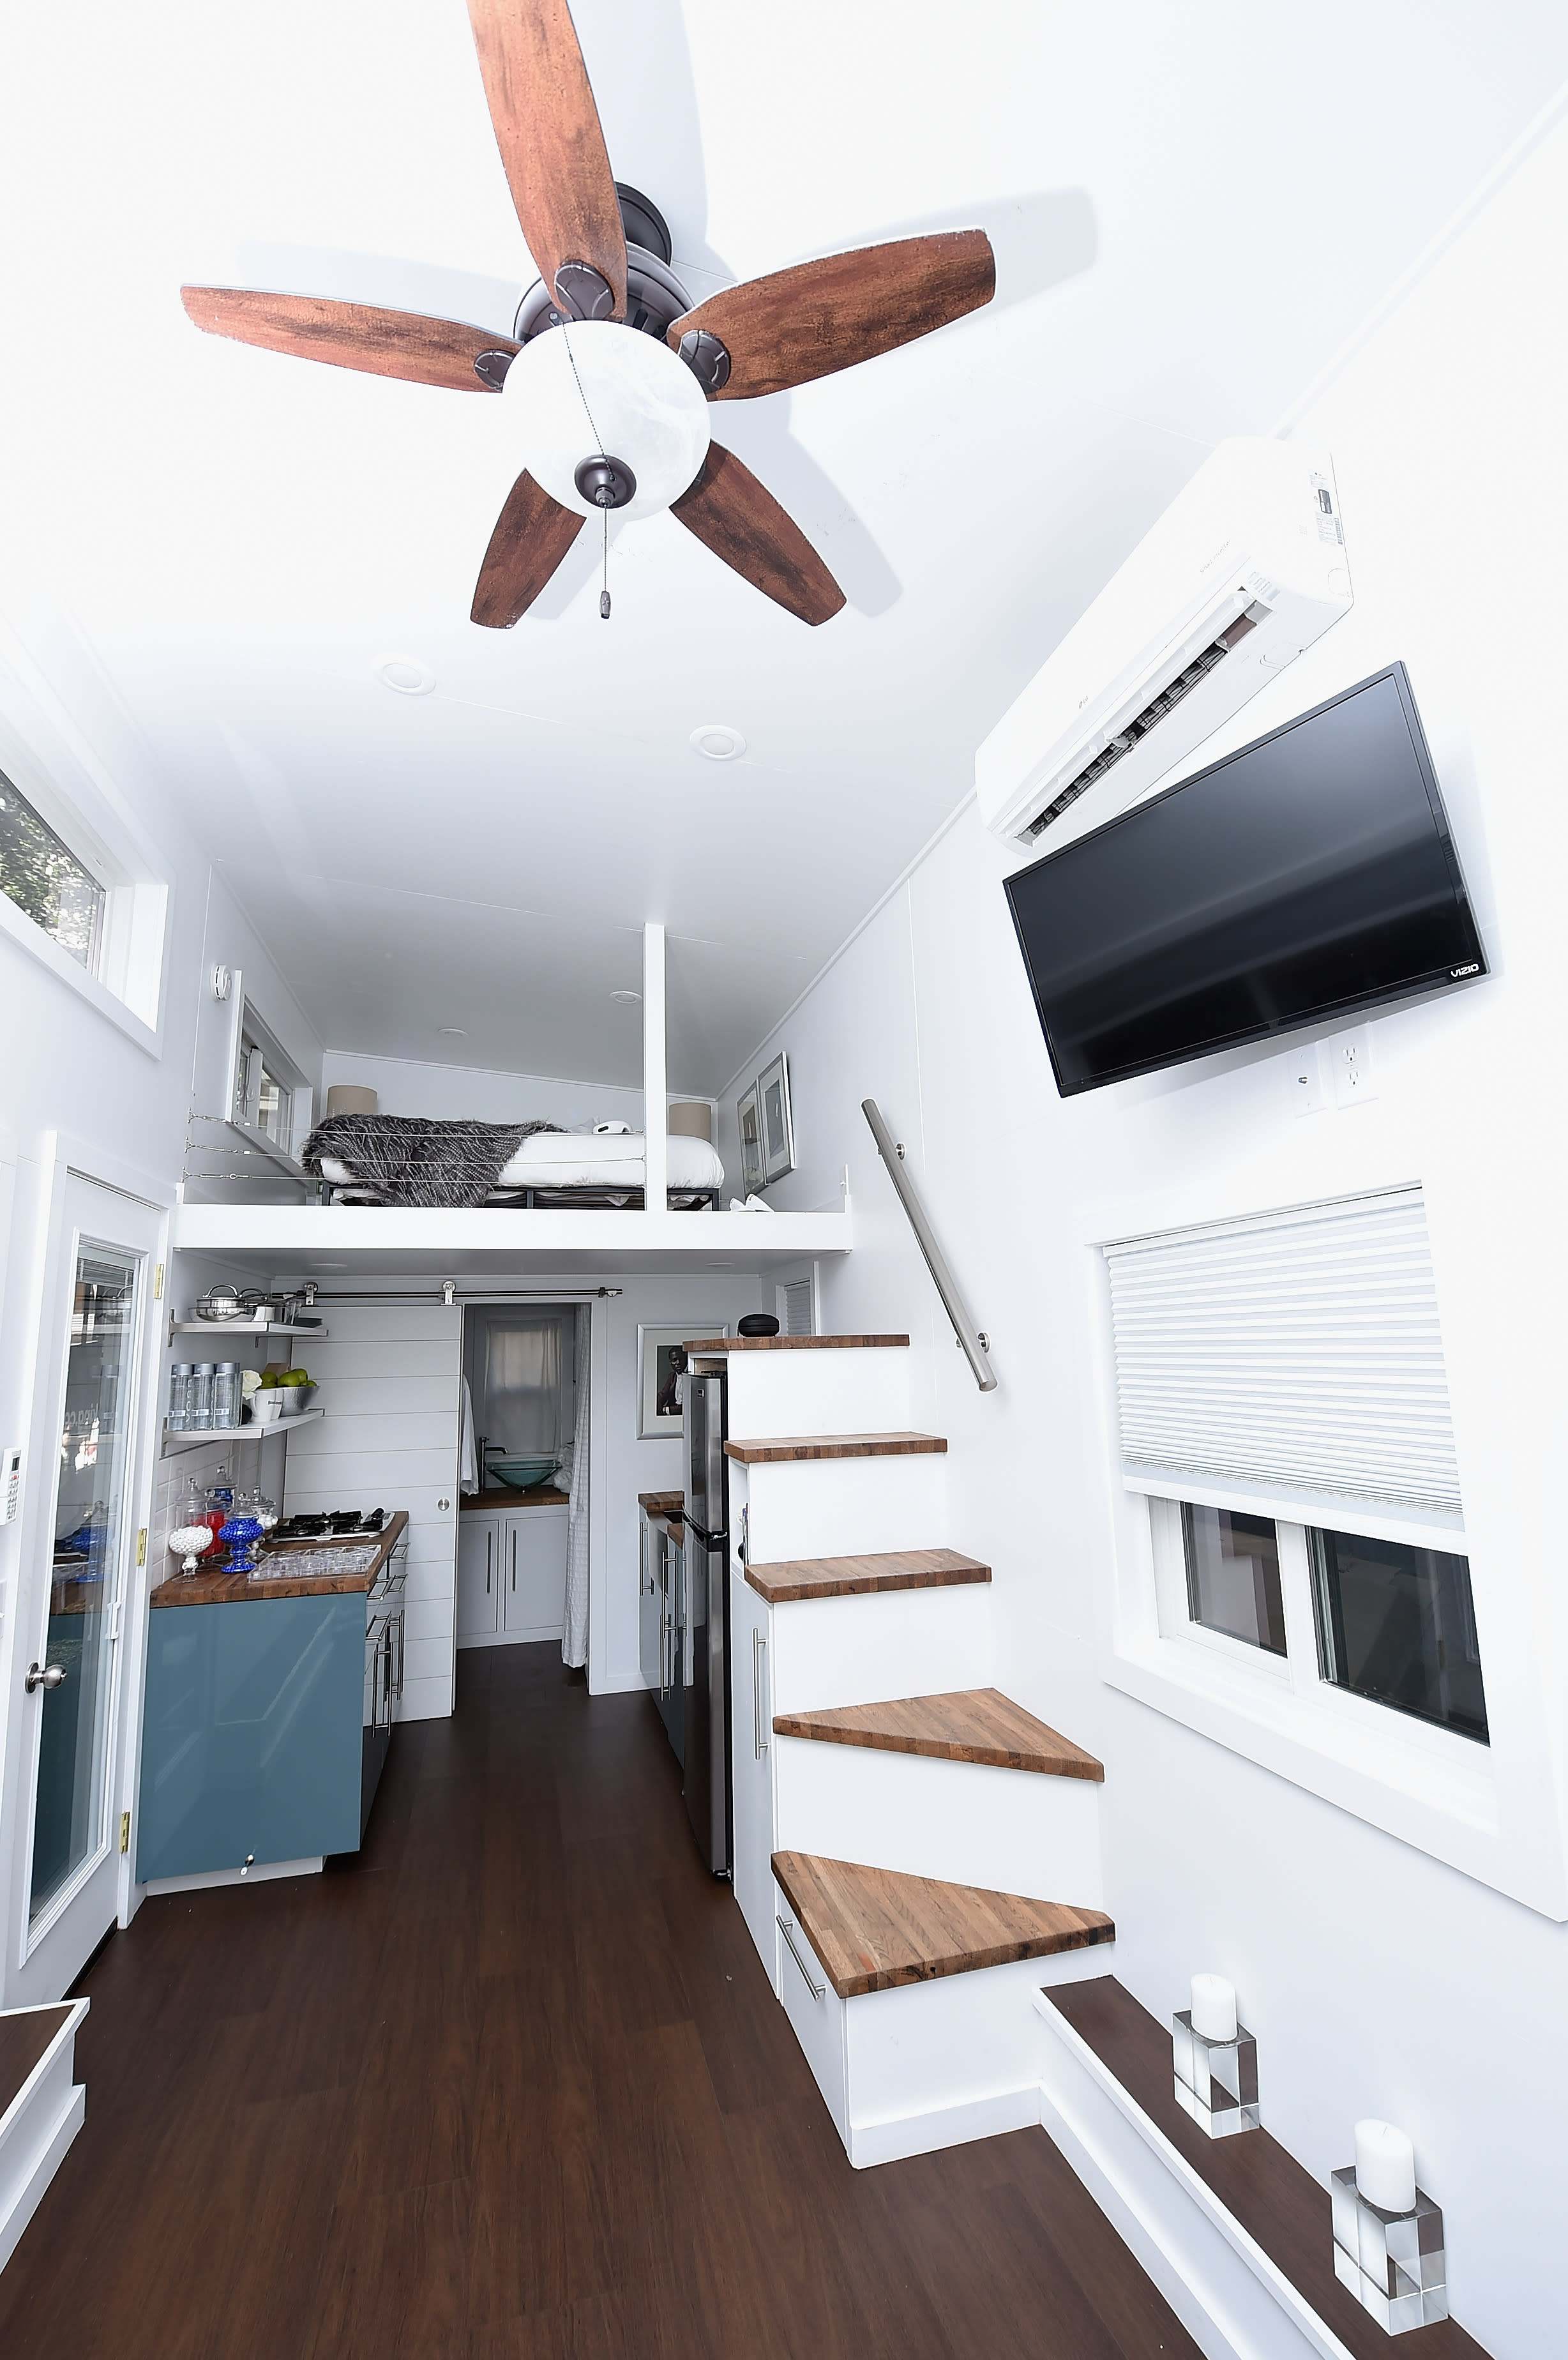 Rent the Tiny House Kevin Hart Designed in NYC | Apartment Therapy